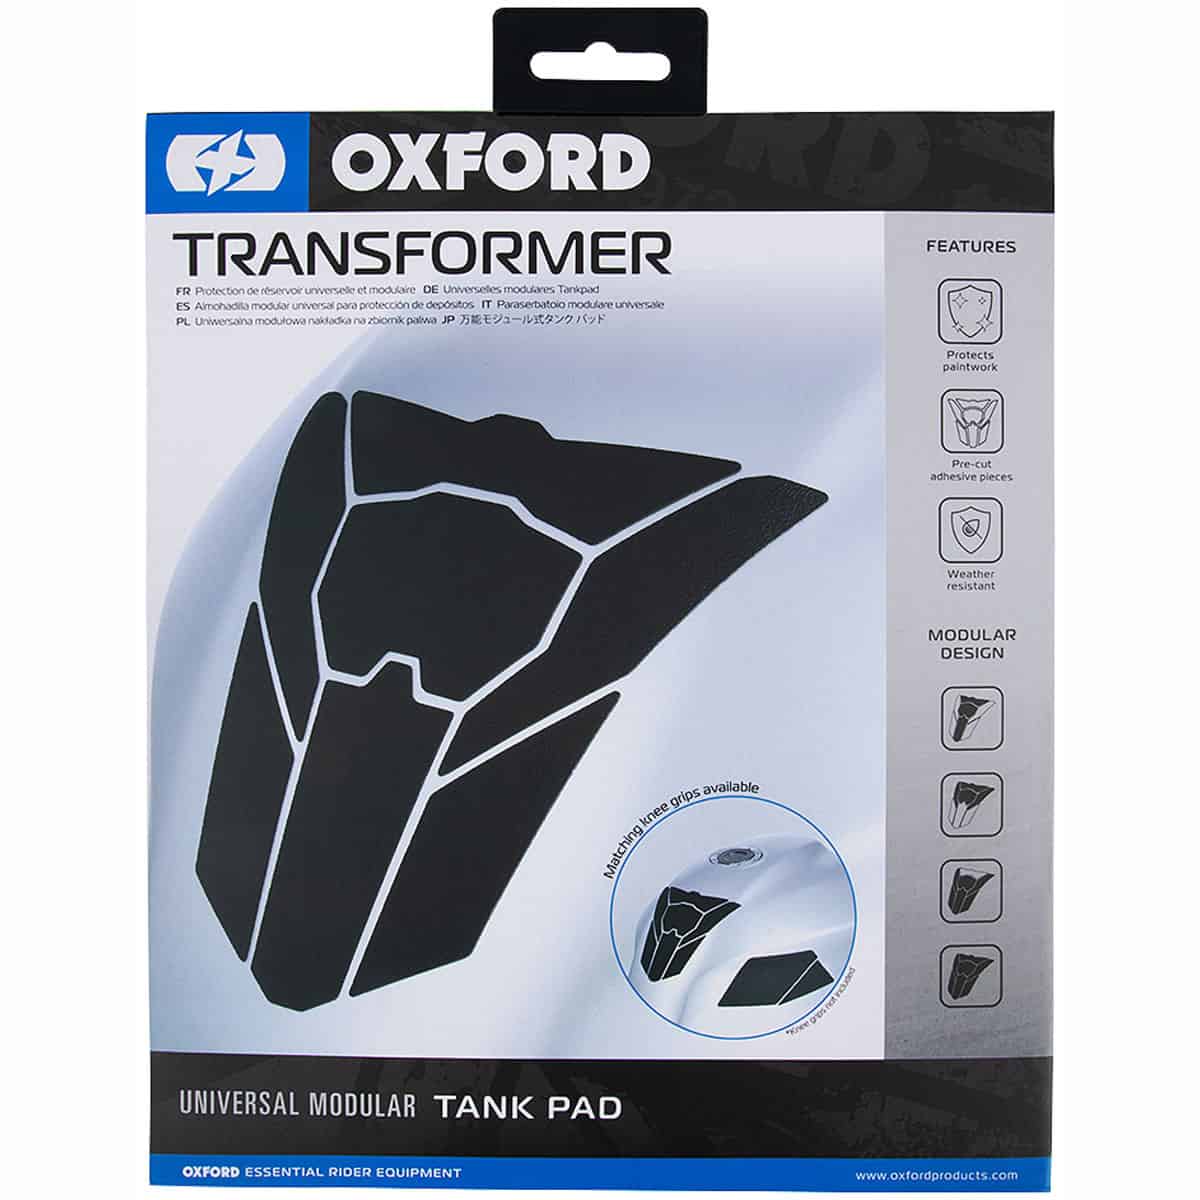 The Oxford Transformer Modular Tank Pad Spine is designed to protect your bike's paintwork from accidental bumps and rubbing.